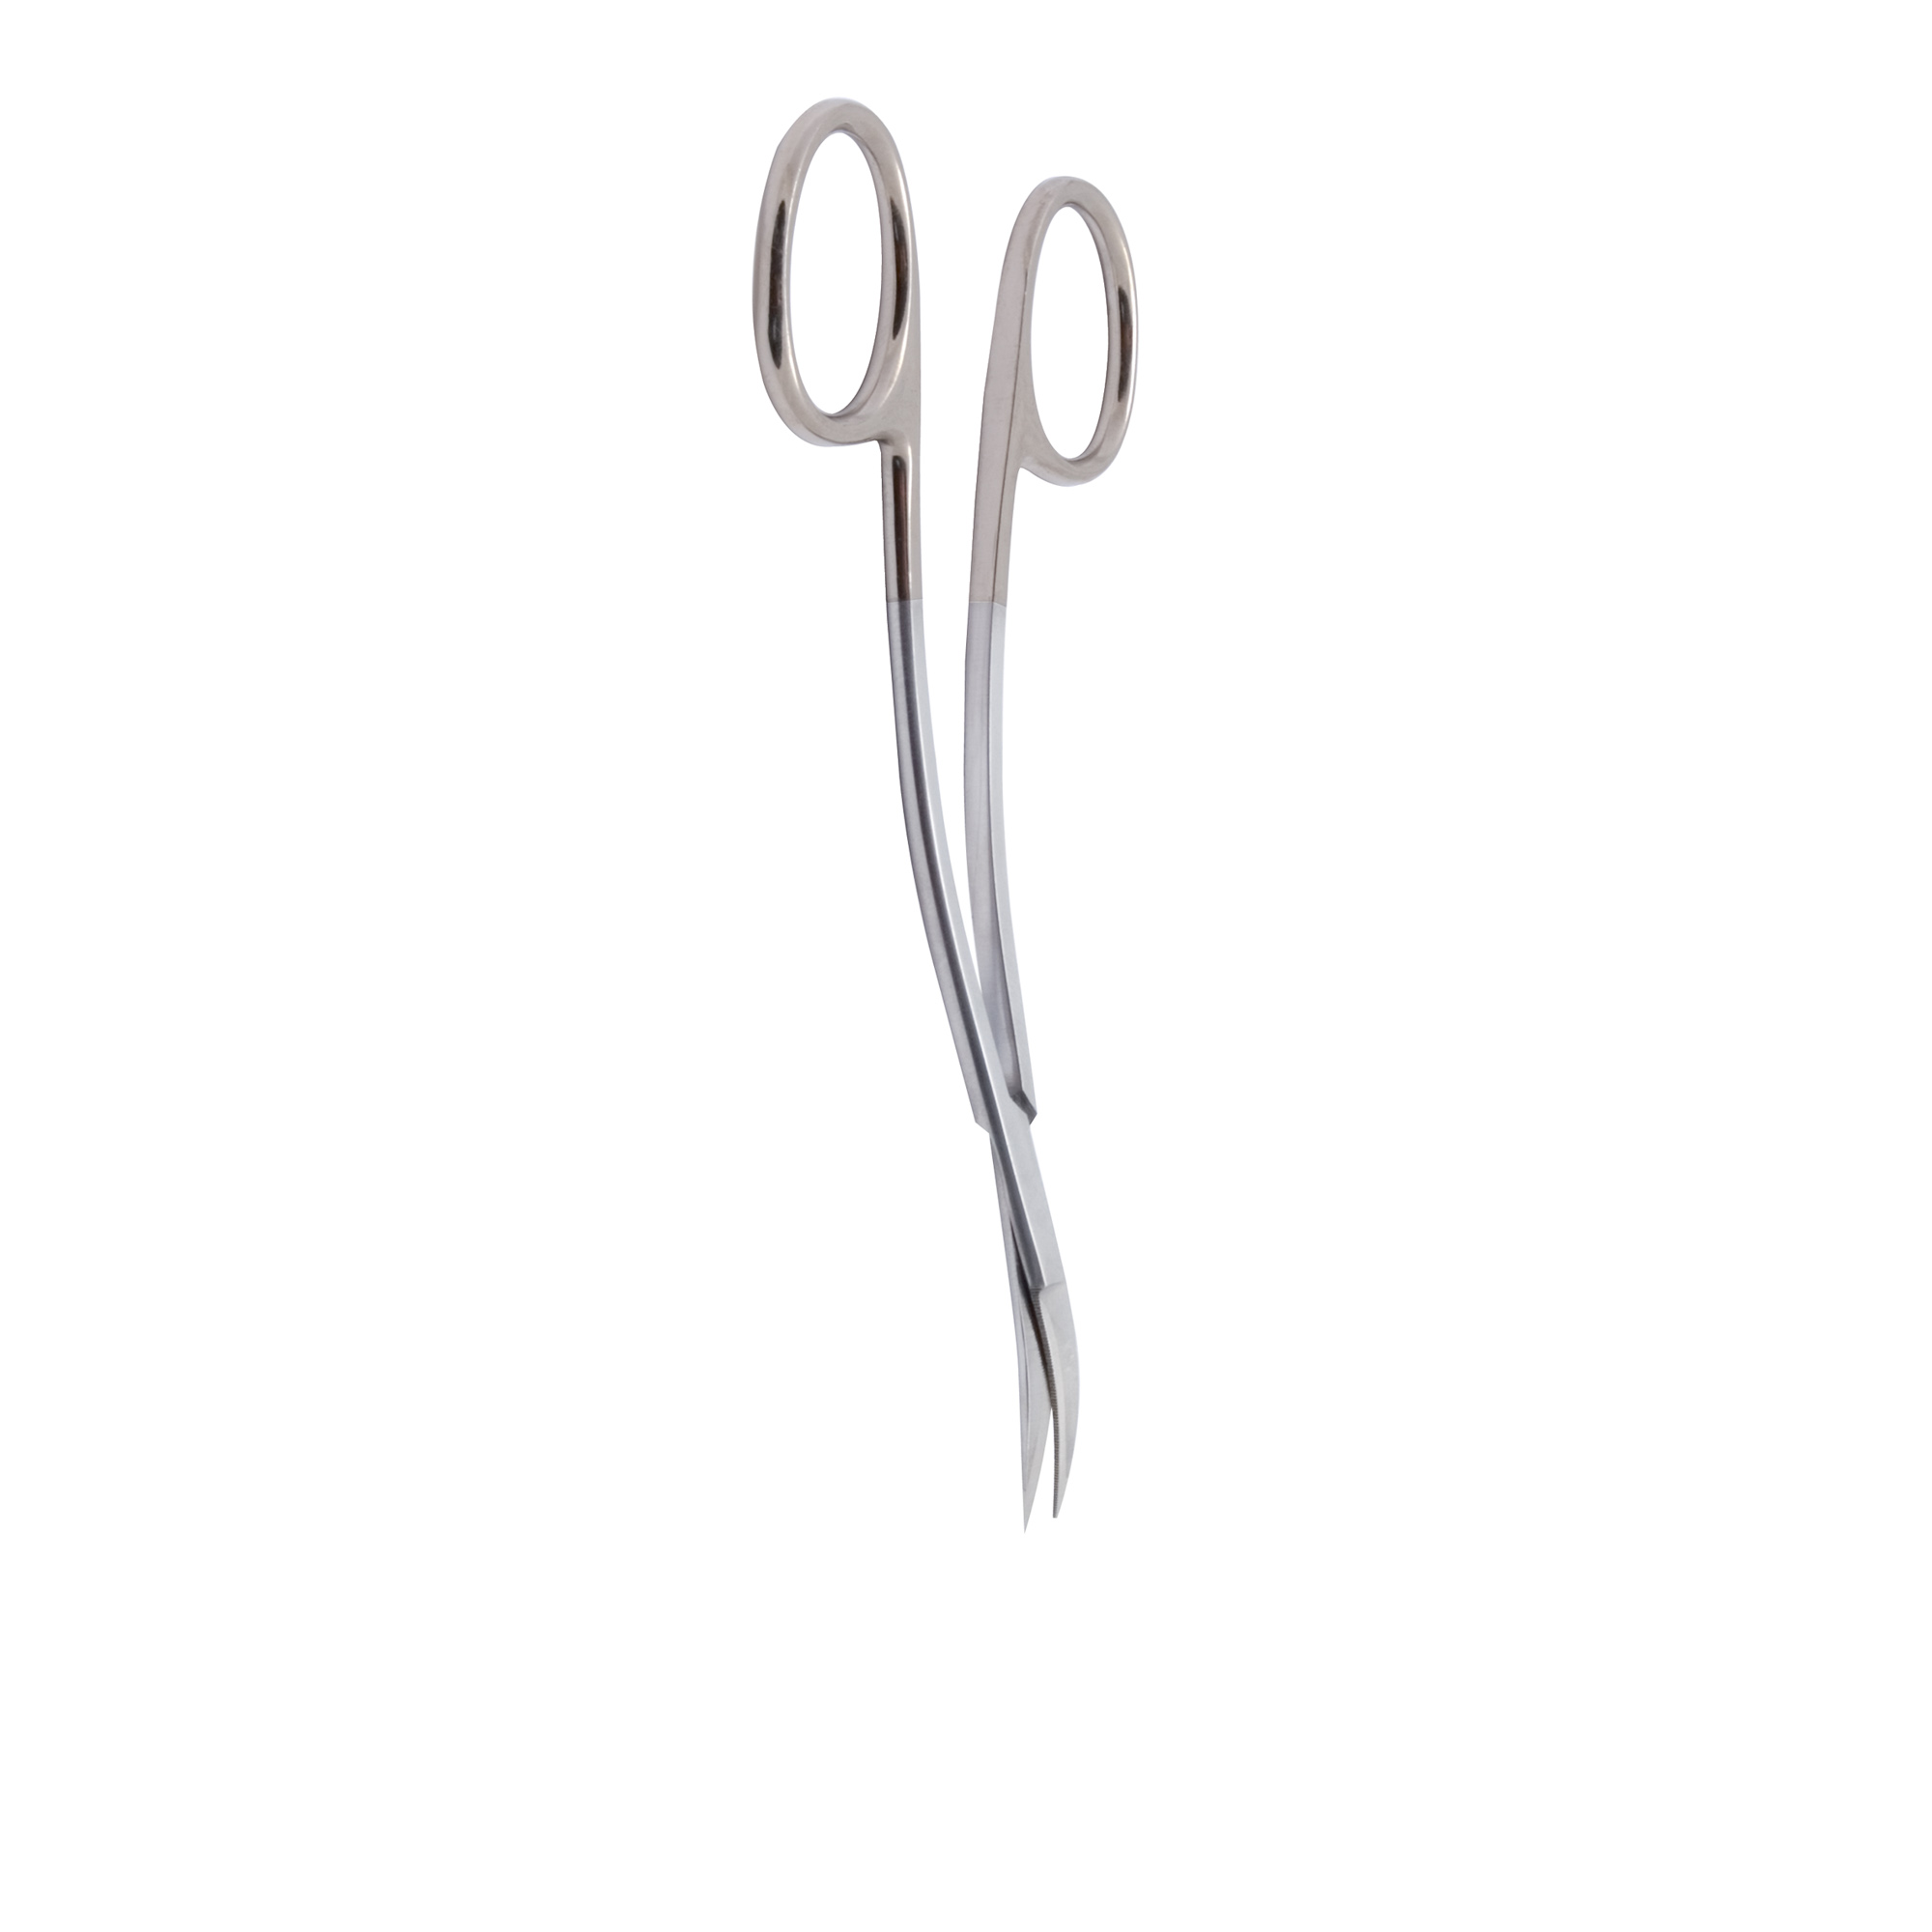 TL9 Surgery, Hand Instrument, Curved Scissors, 116mm Length